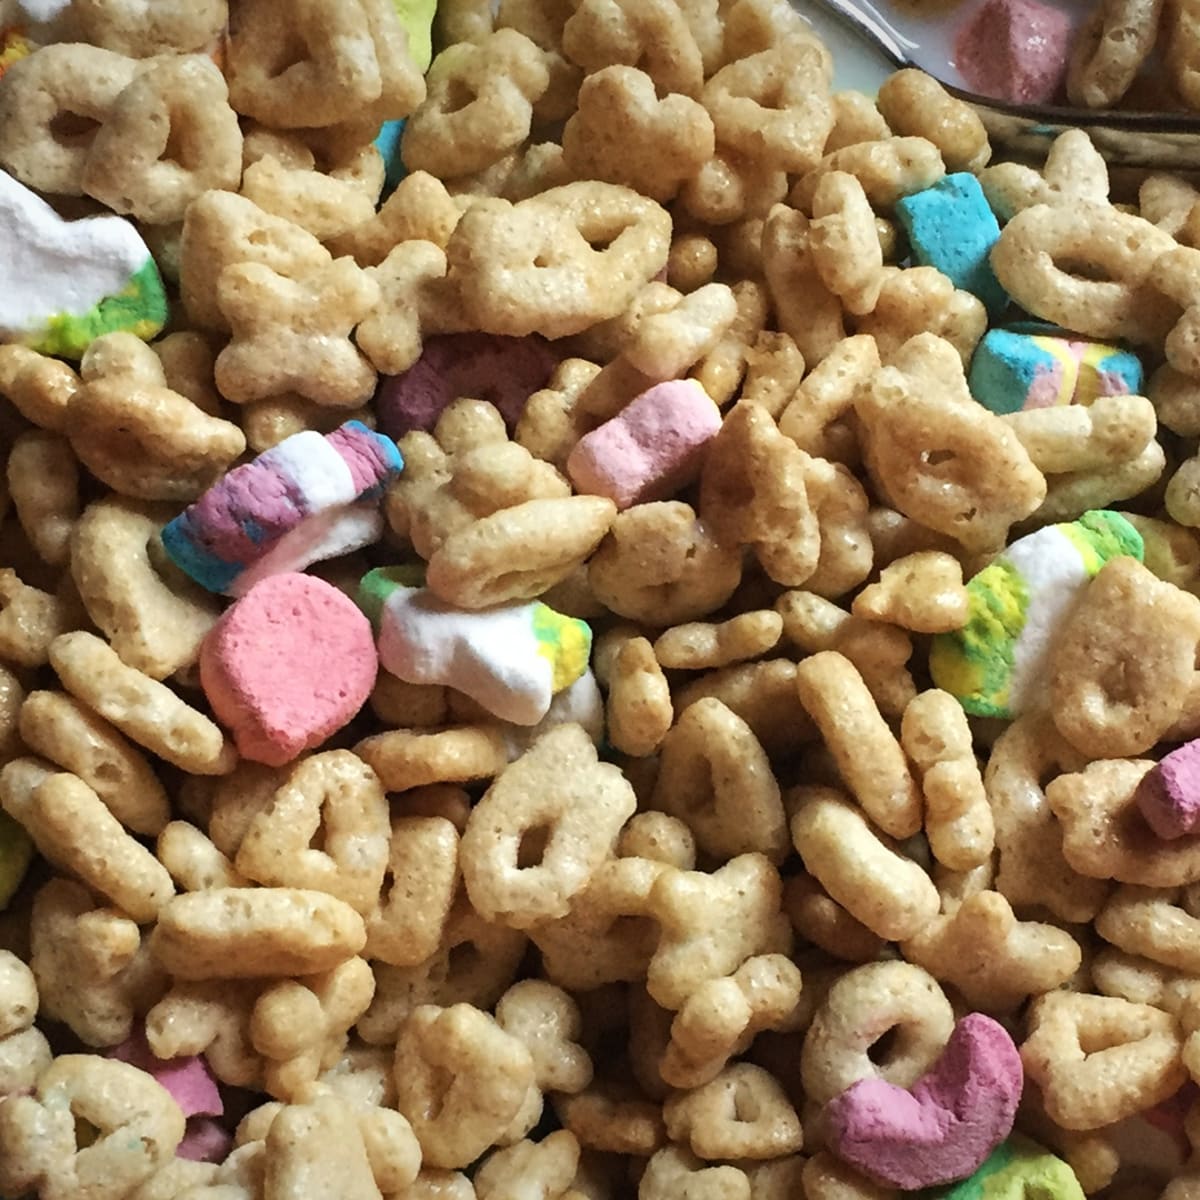 Lucky Charms cereal causing vomiting, diarrhea: report